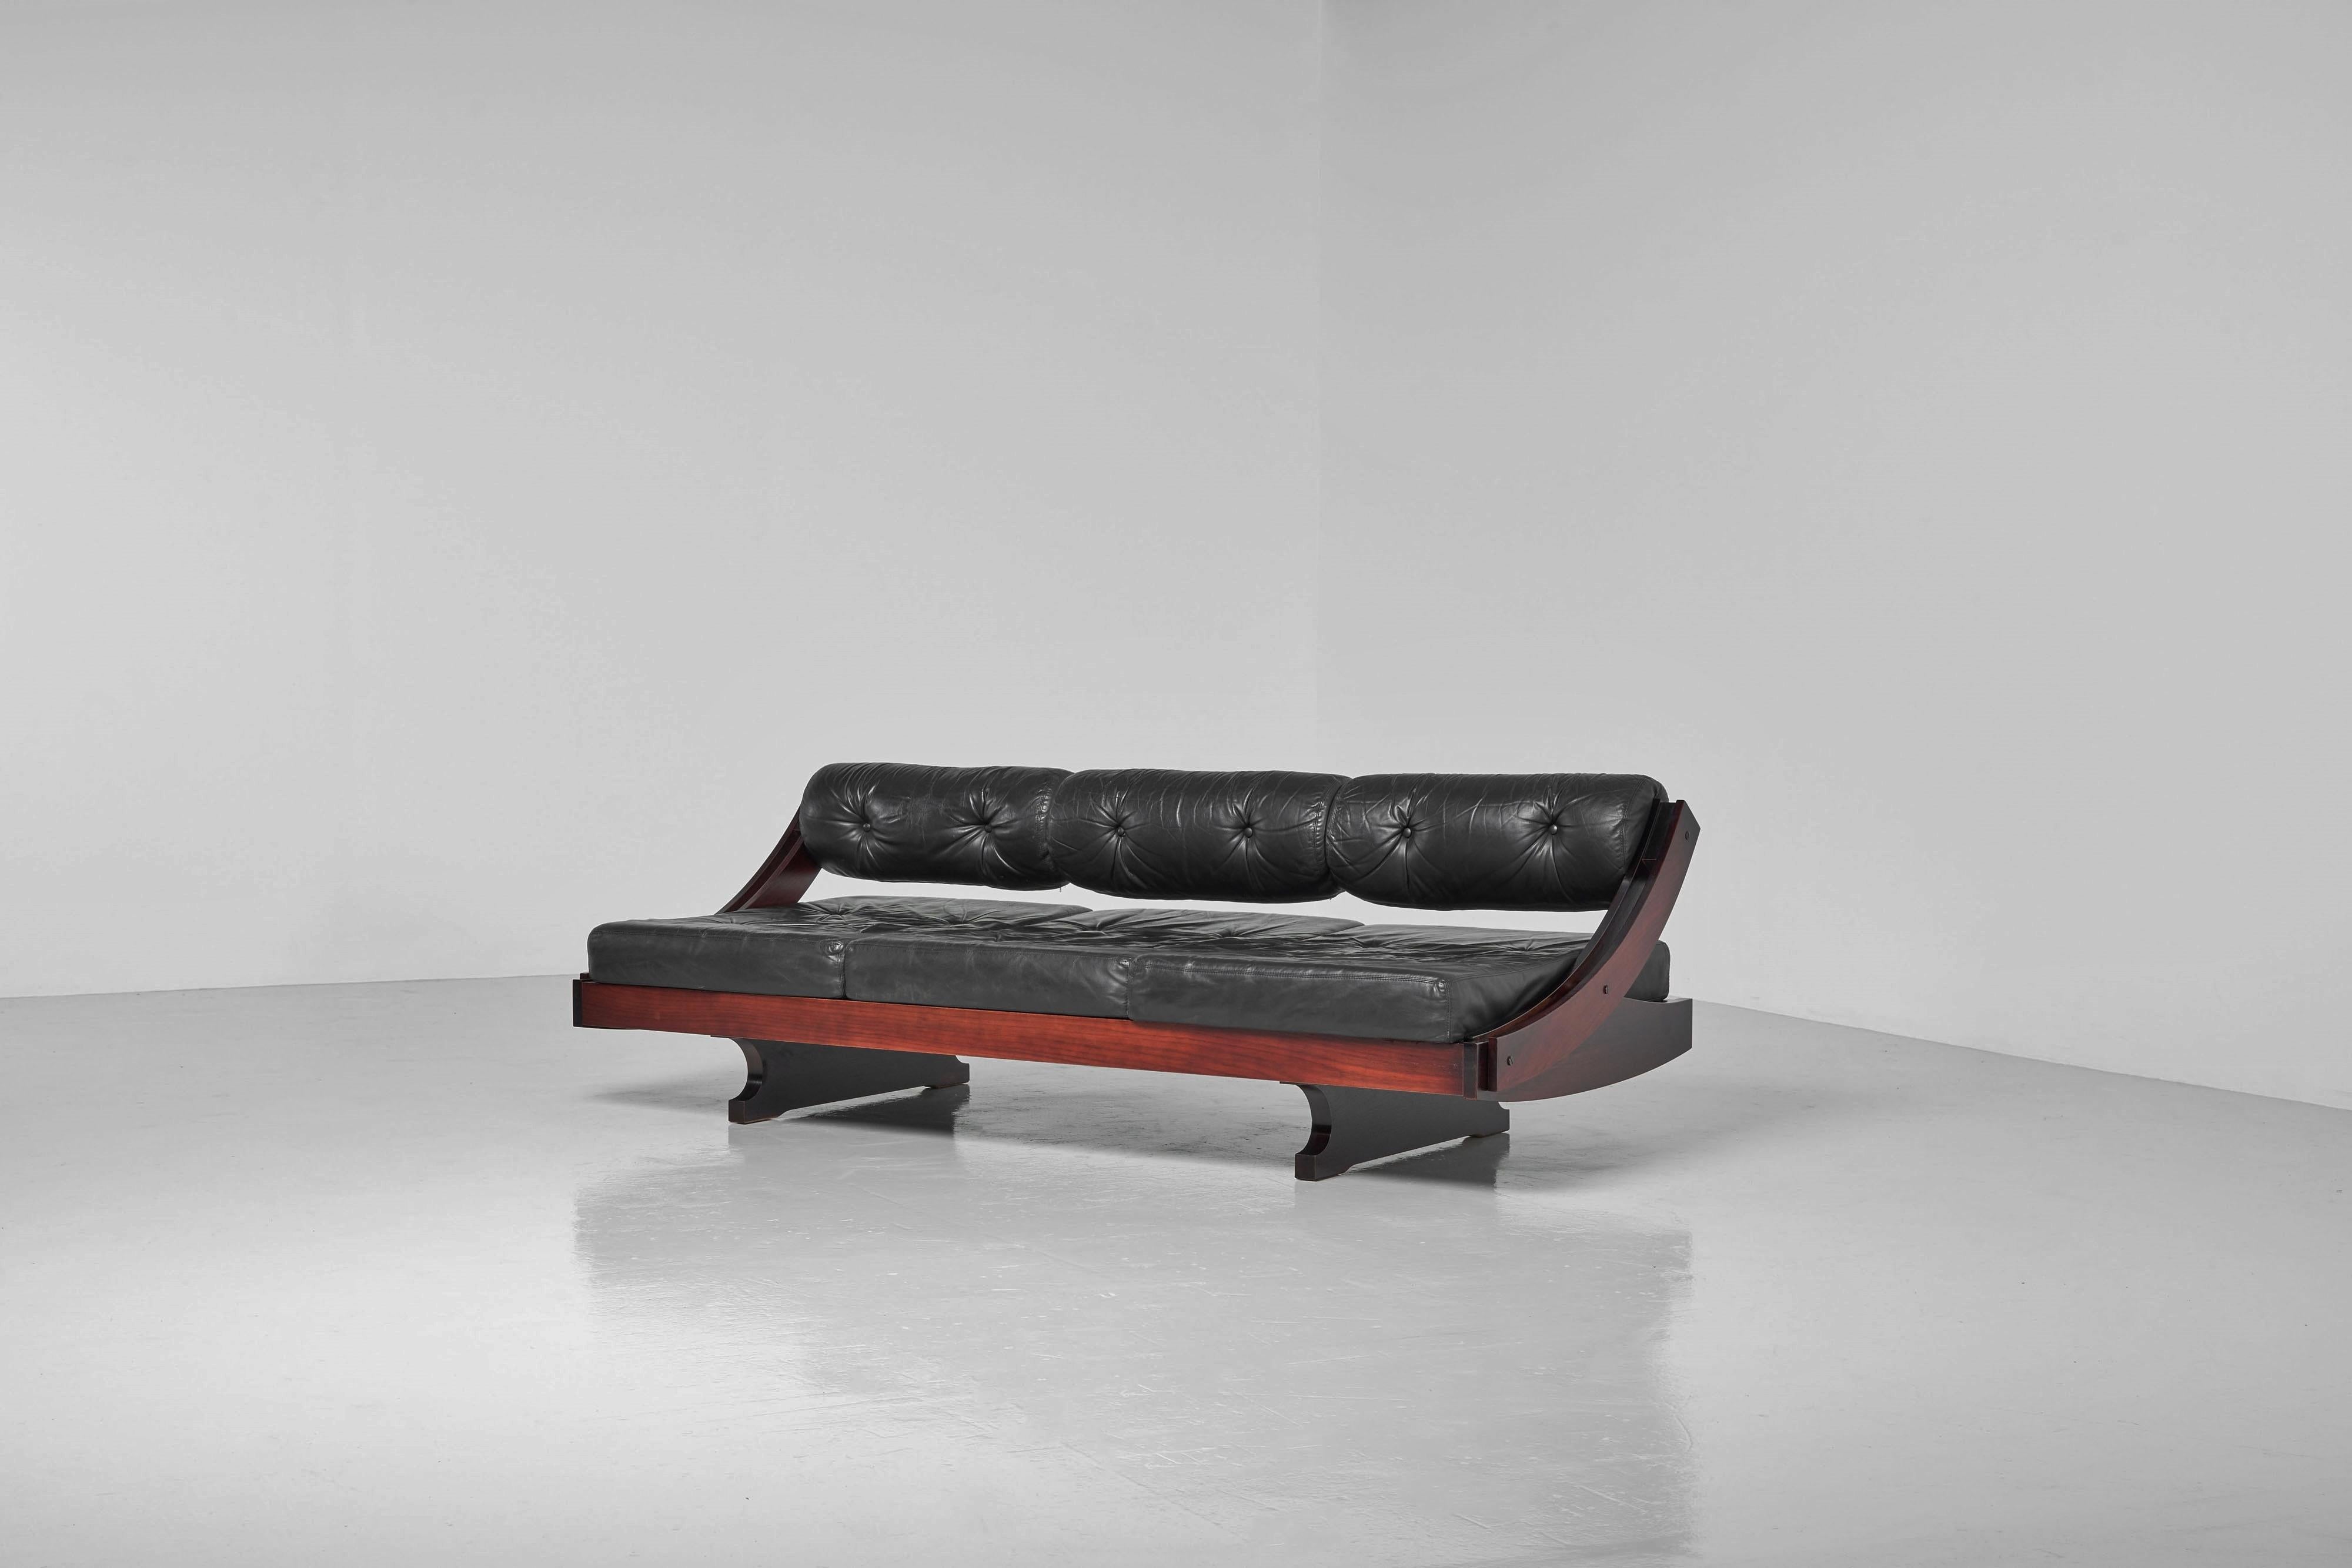 Great lounge sofa-daybed model GS195 designed by Gianni Songia for Sormani in Italy 1963. The GS195 features a sculptural mahogany sliding frame. Its original black leather cushions and seating provide both comfort and style. With just one hand, you